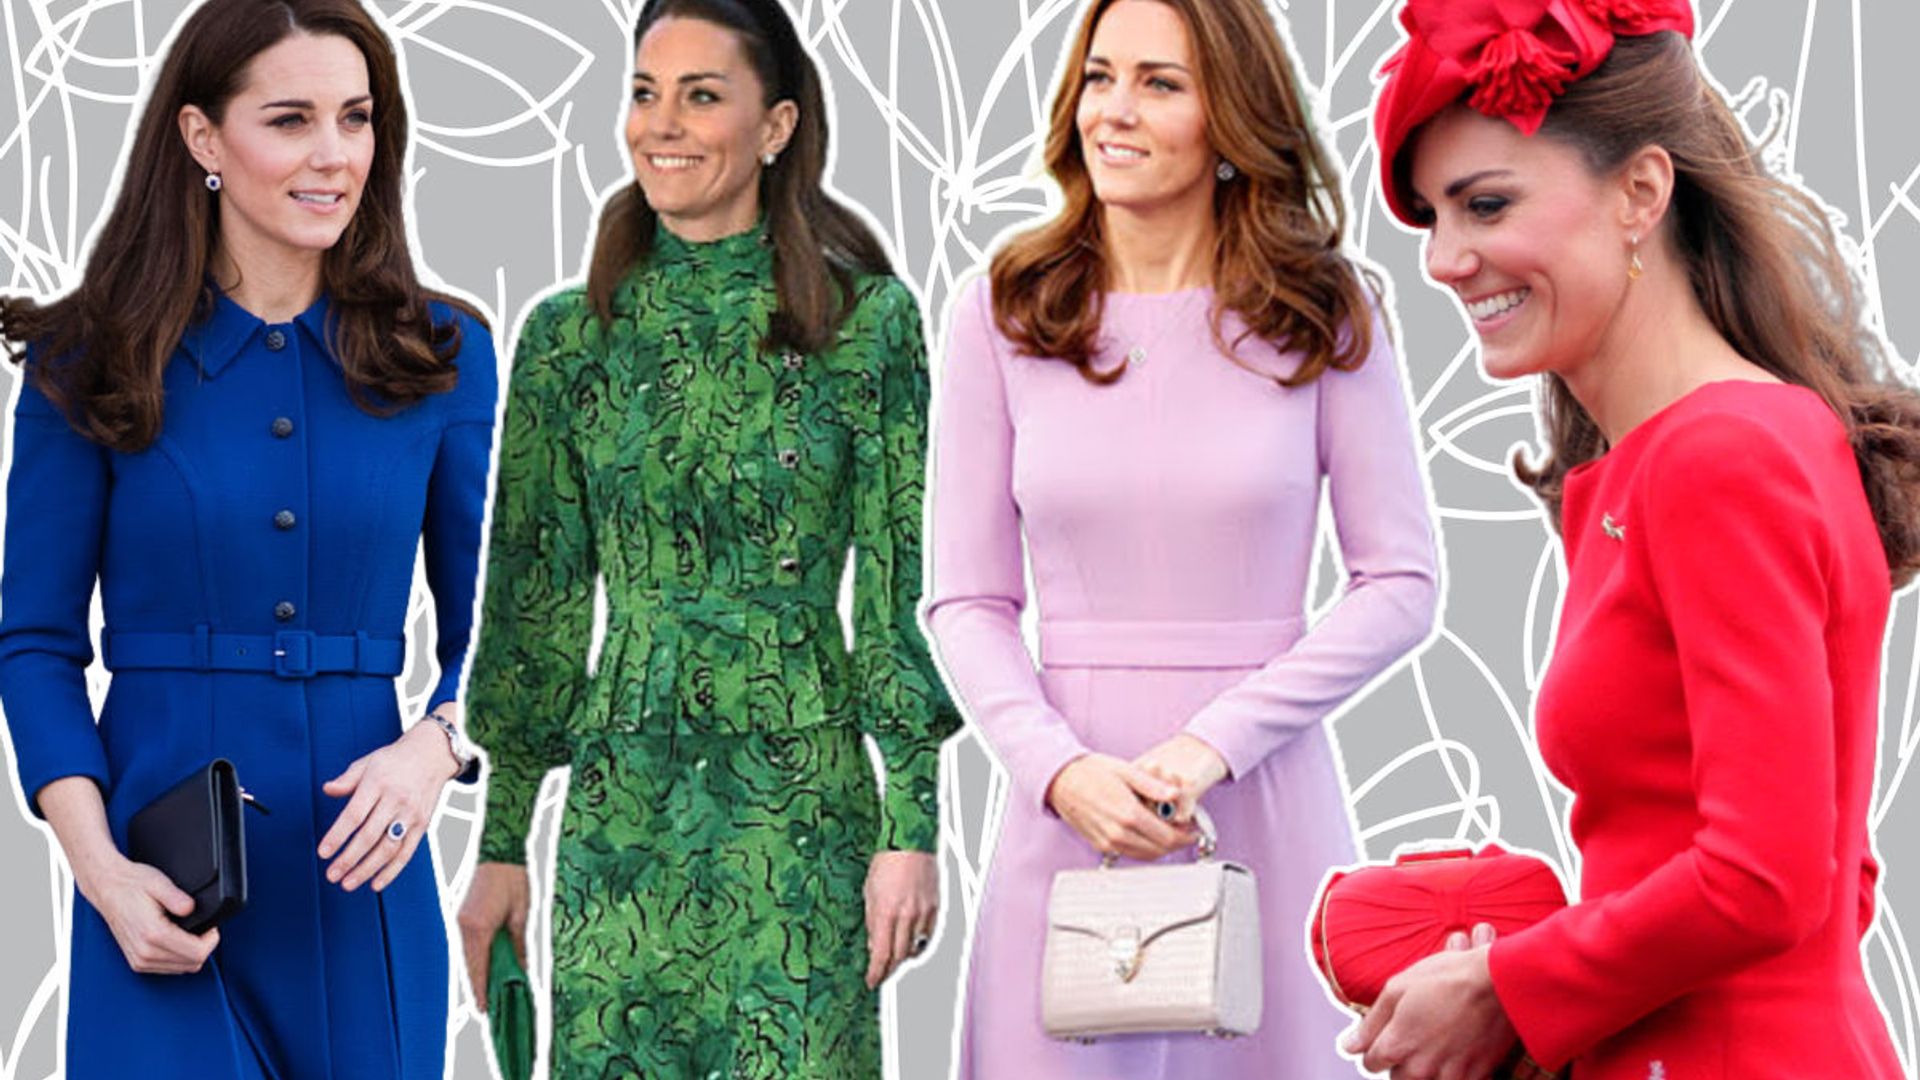 Princess Kate's favourite handbags are up to 60% off in the sales